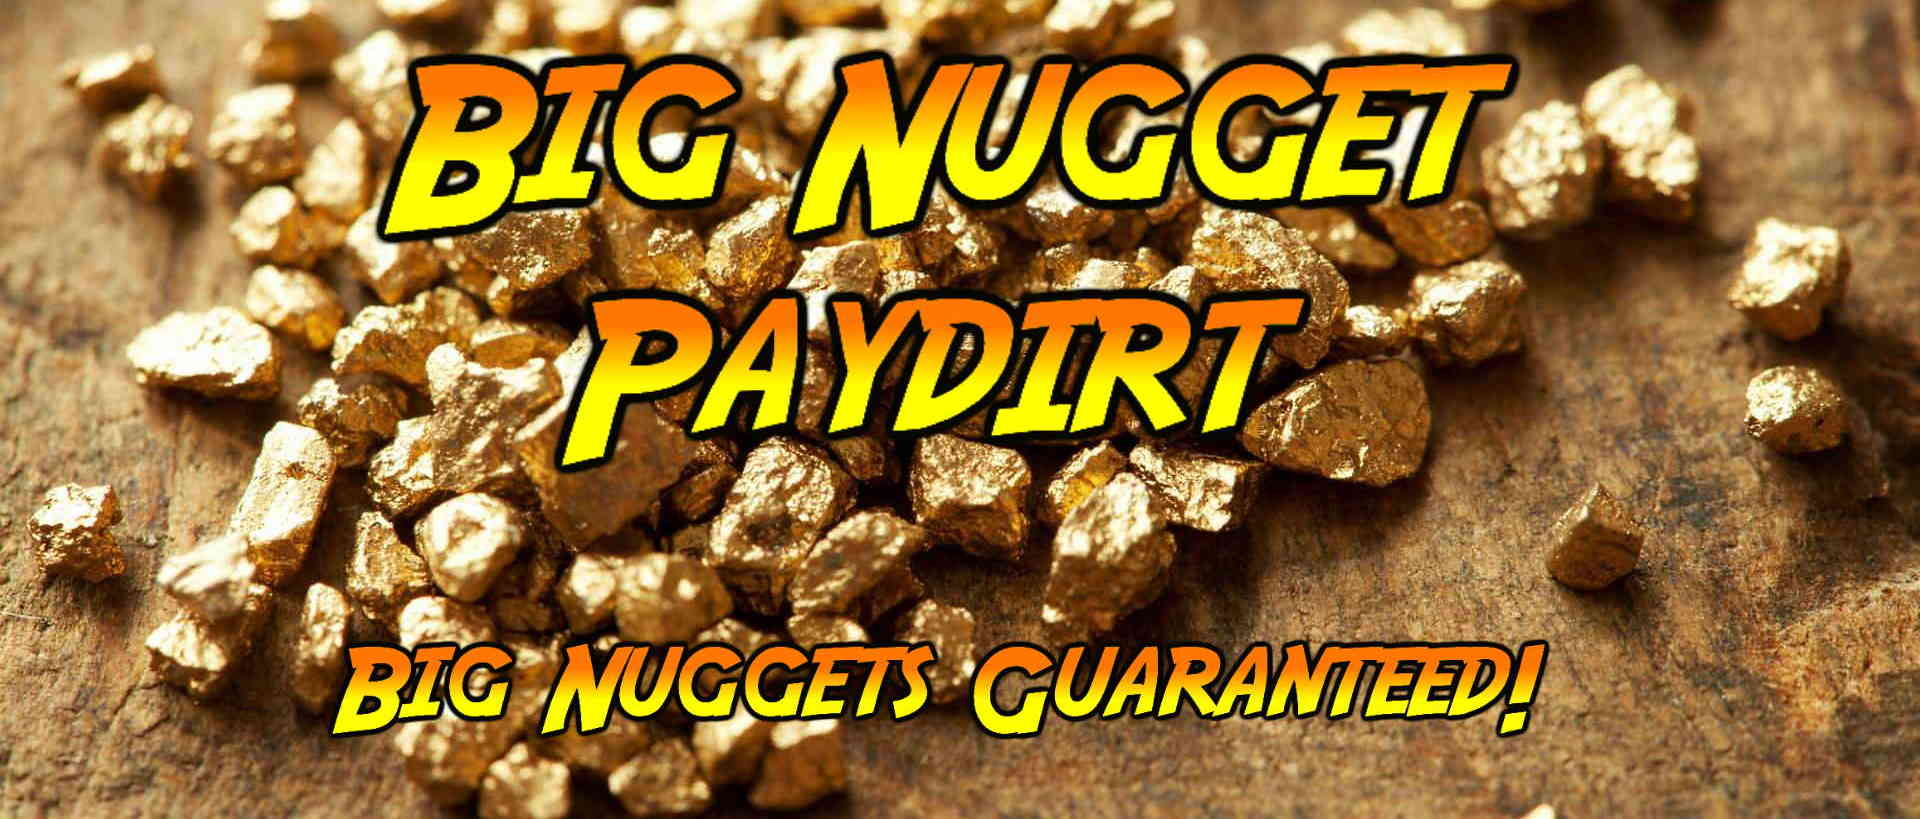 CHILKOOT PASS CLAIM - 40 POUNDS of Big Nugget Paydirt. This Paydirt is  Considerably More Rich and Has Twice The Nuggets! - Big Nugget Paydirt ™  Big Nuggets Guaranteed! %